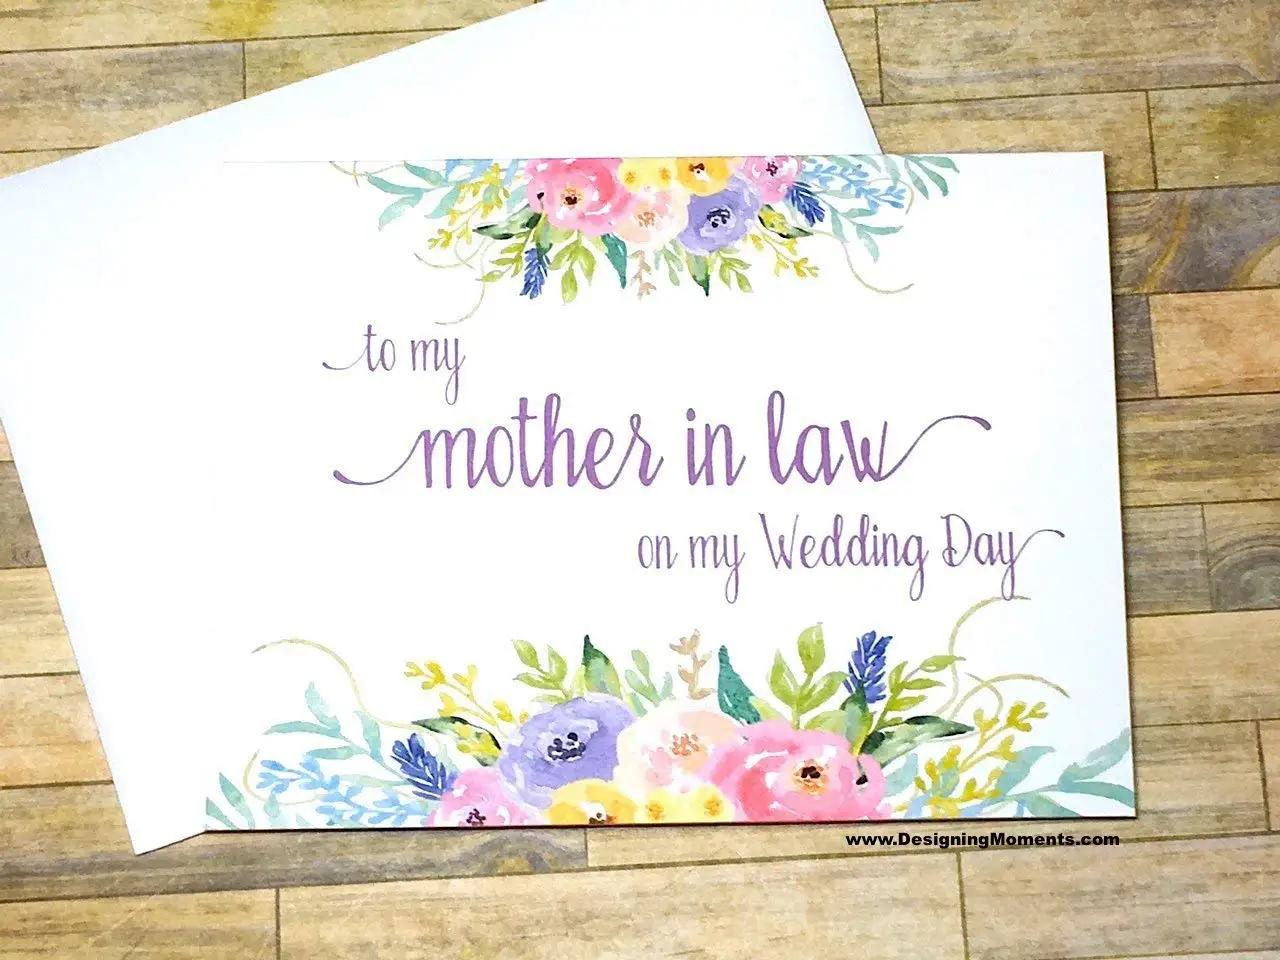 Cheap Letter To Mother In Law On Wedding Day Find Letter To Mother